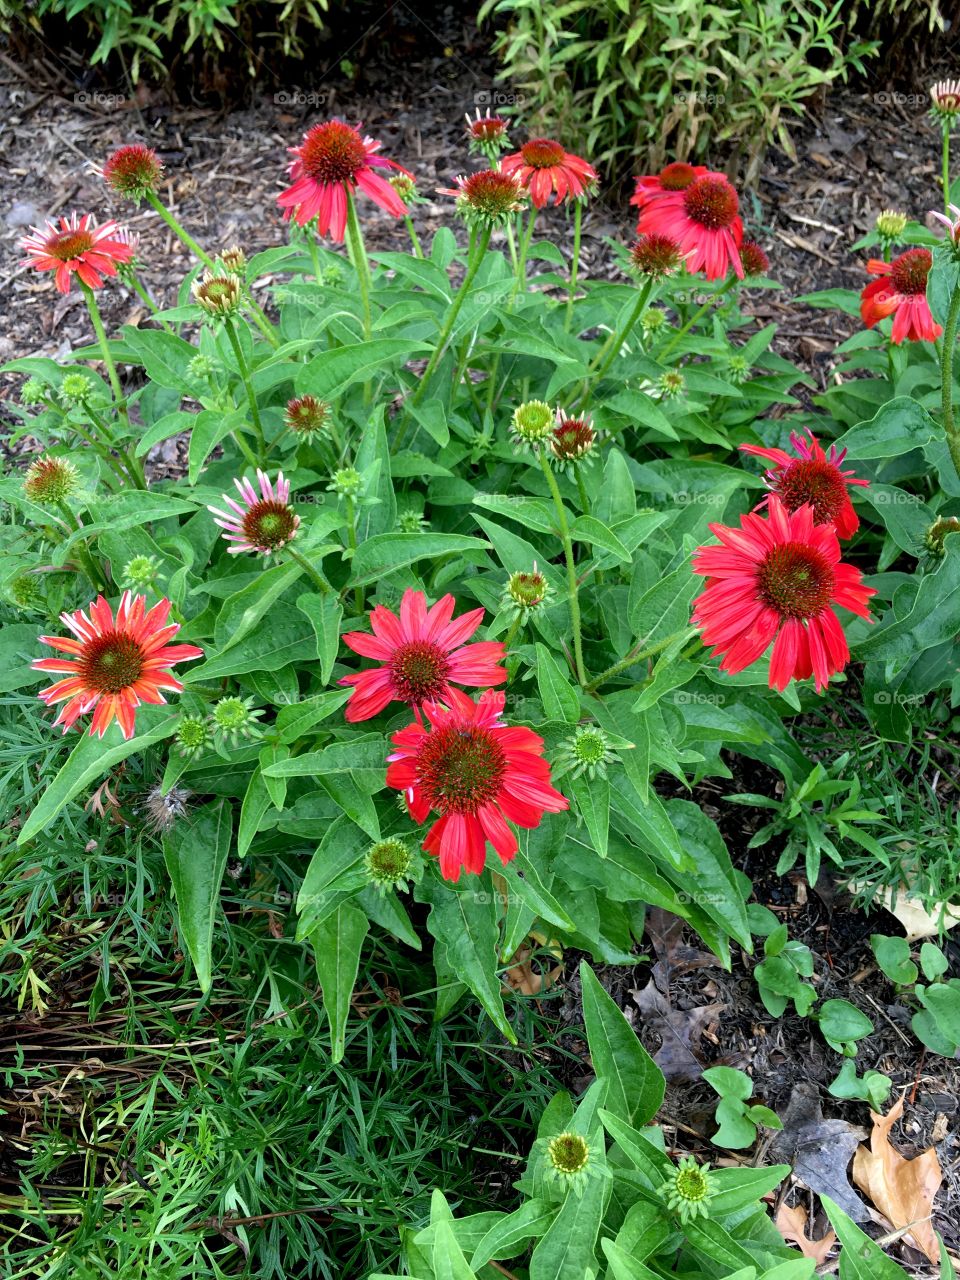 Red cone flower in the garden after recent rain